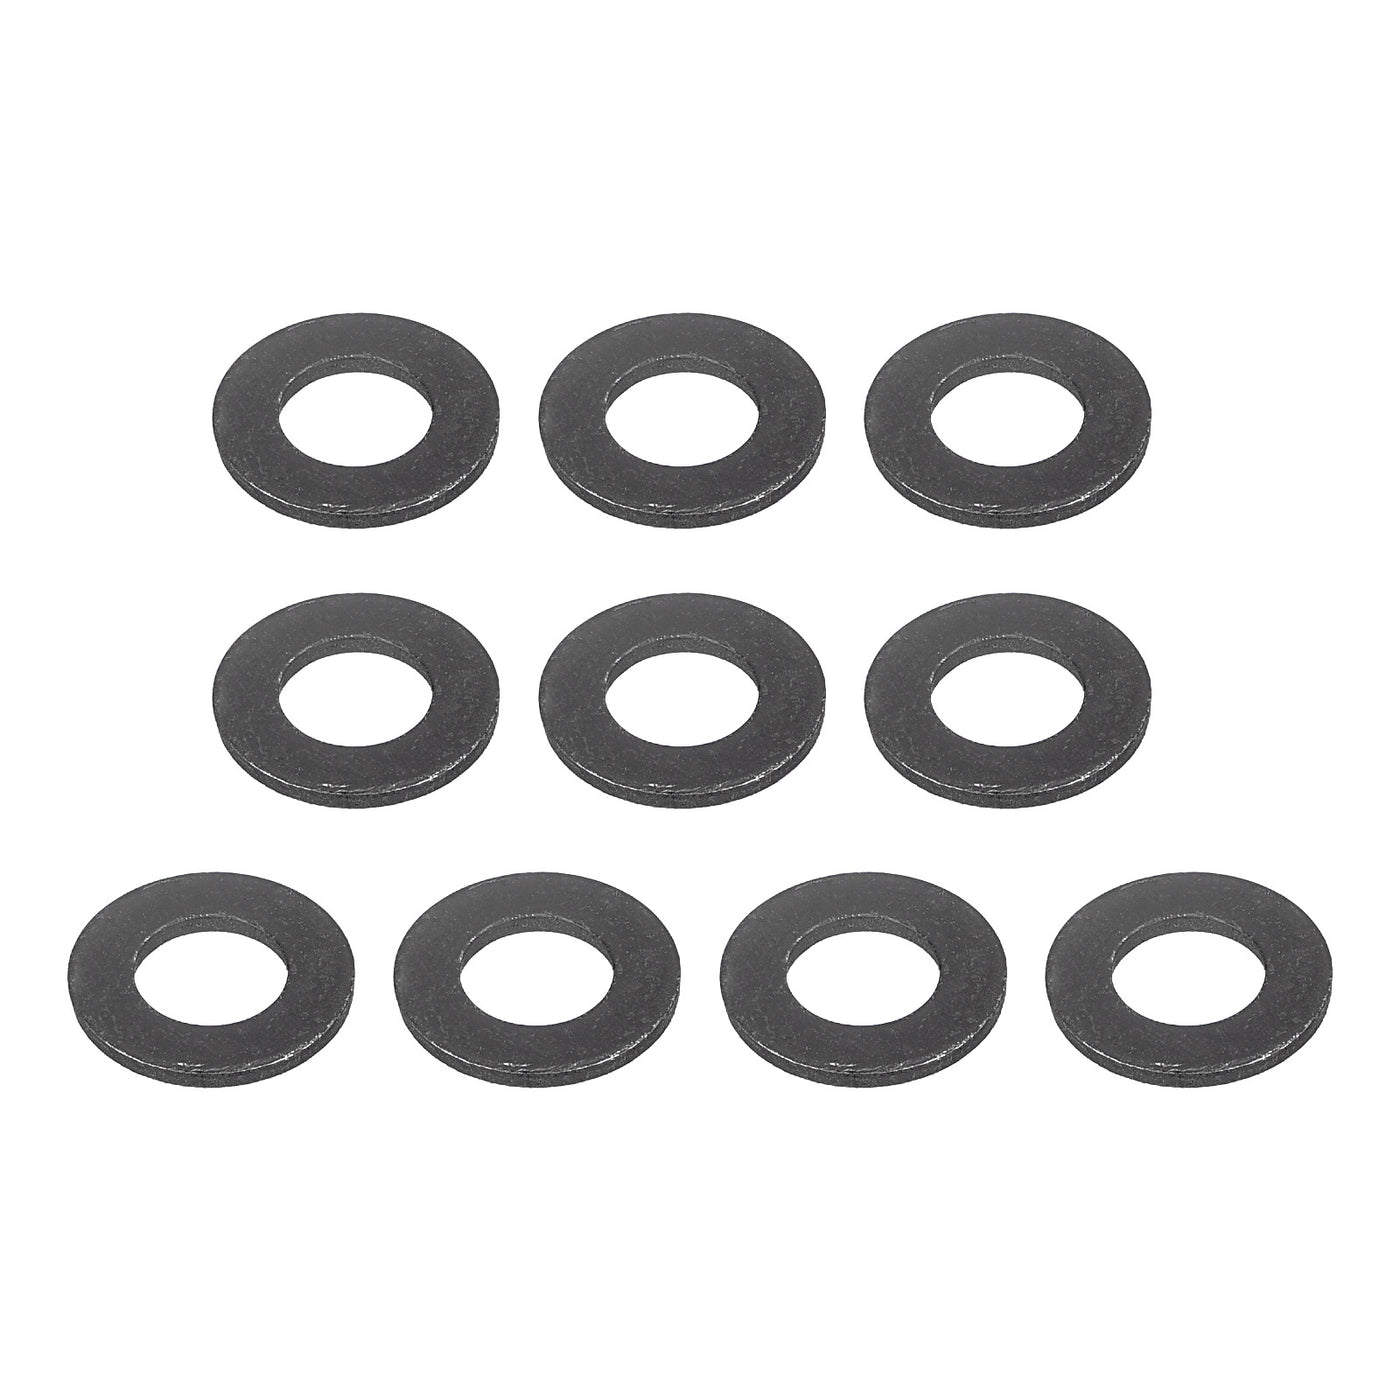 uxcell Uxcell M8 Carbon Steel Flat Washer 10pcs 8.4x16x1.5mm Grade 8.8 Alloy Steel Fasteners